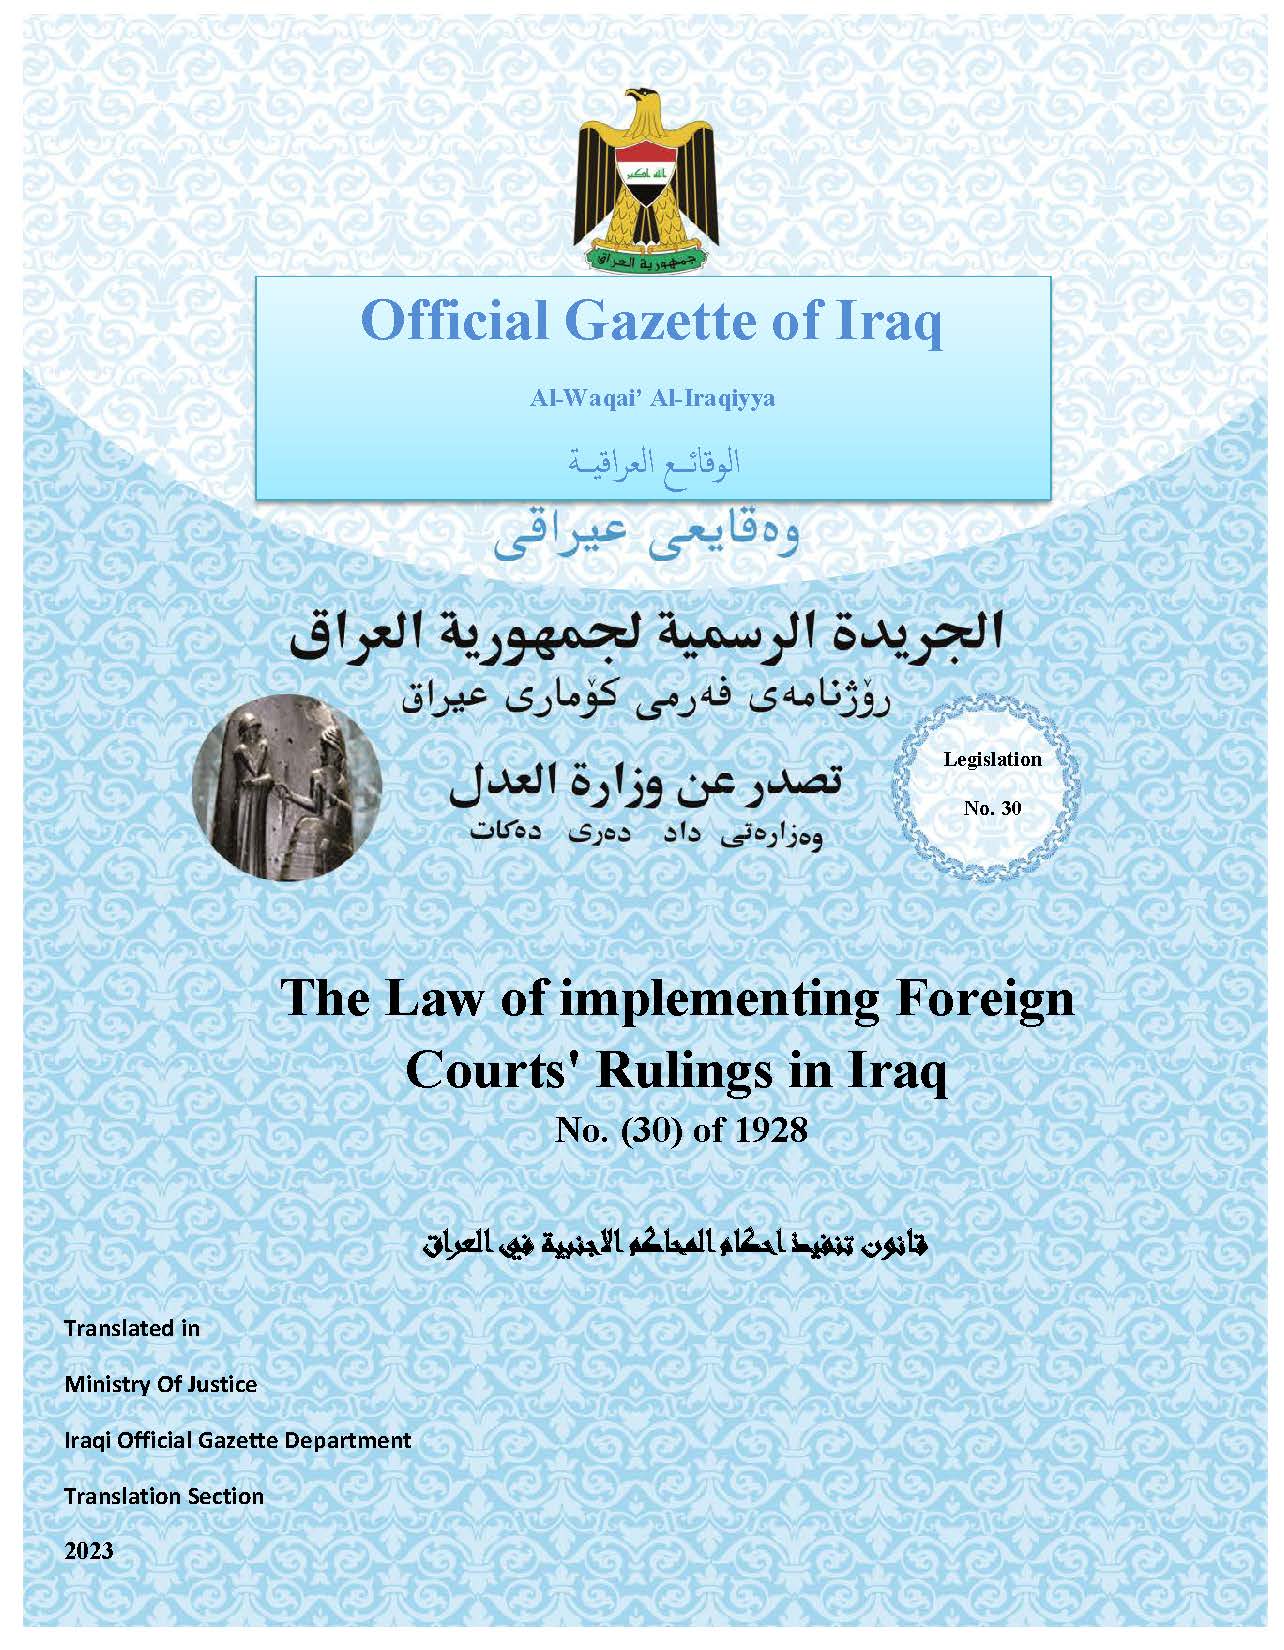 The Law of implementing Foreign Court's Rulings in Iraq No.(30) of 1928